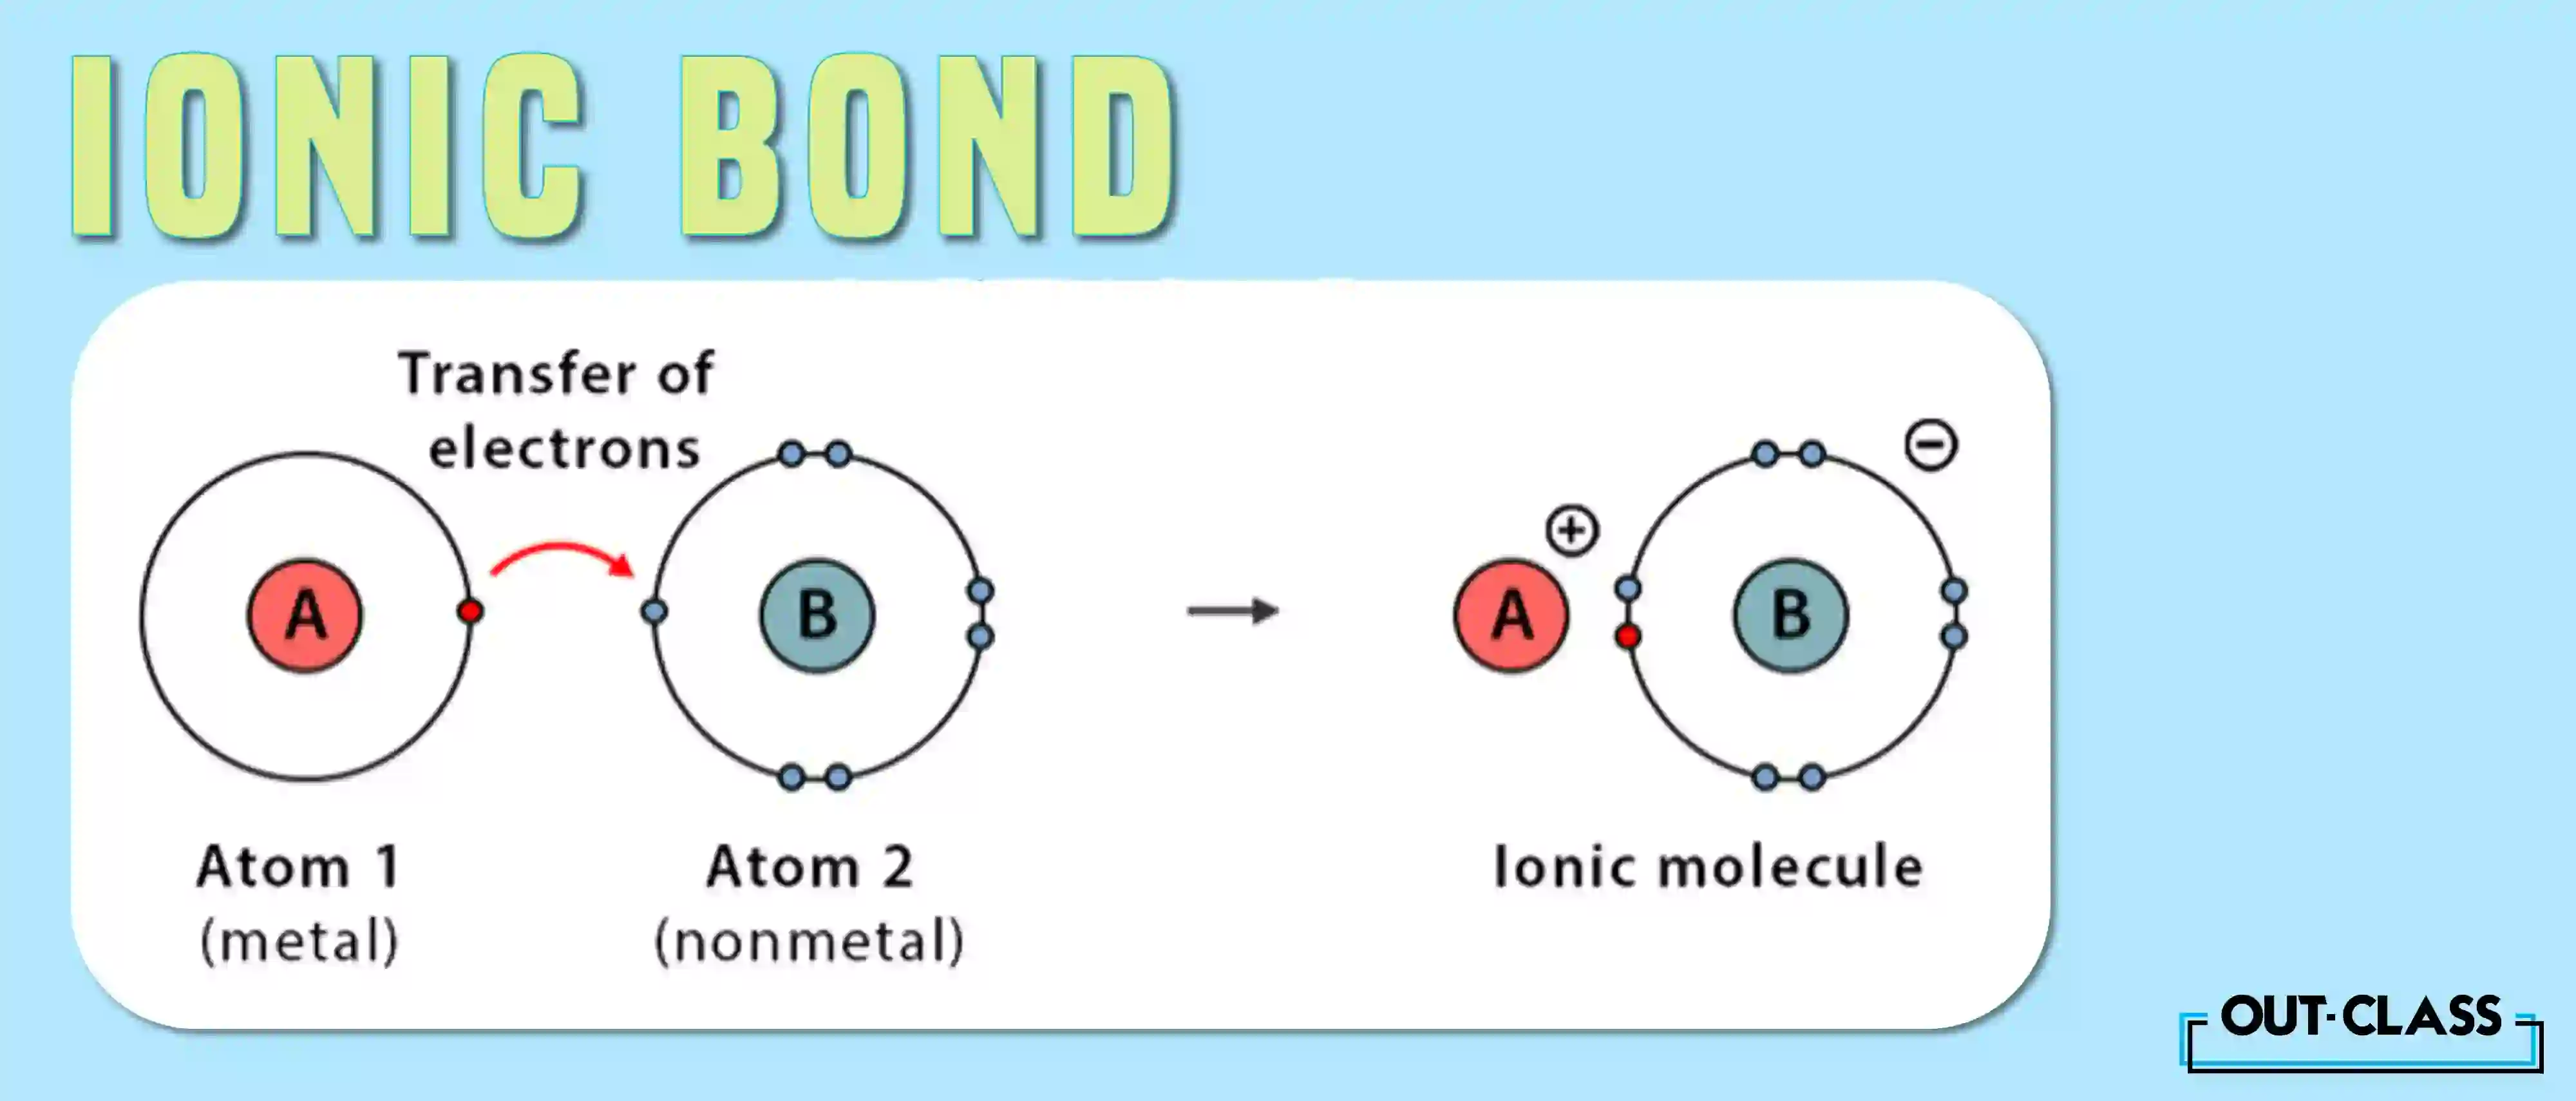 Ionic bonding revolves around the electrifying exchange of electrons.